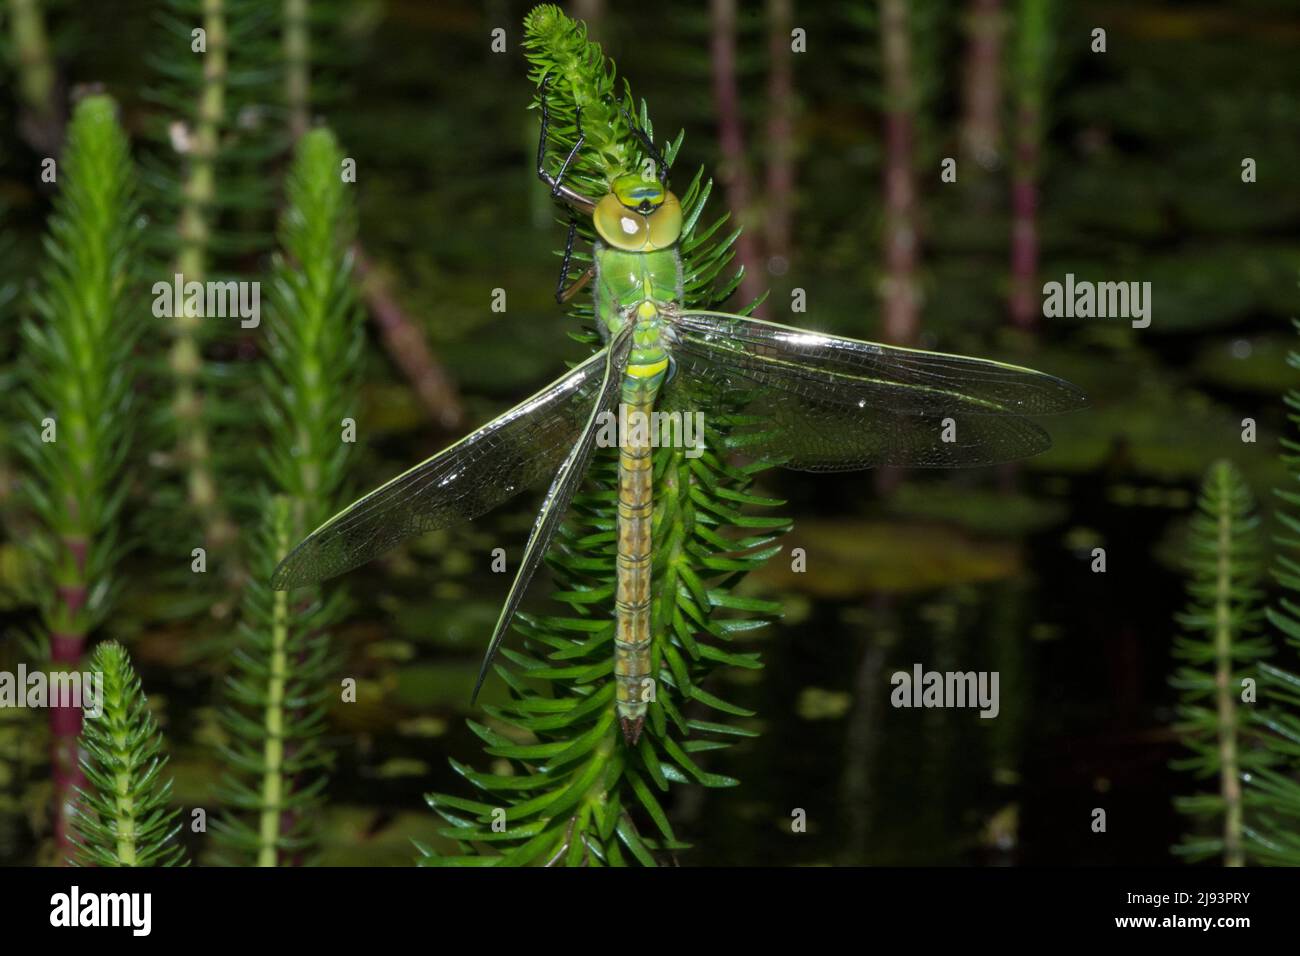 Emperor dragonfly, Anax imperator, emerging from larval case at night, will not develop well, damaged wing, unsuccessful metamorphosis, May, UK Stock Photo